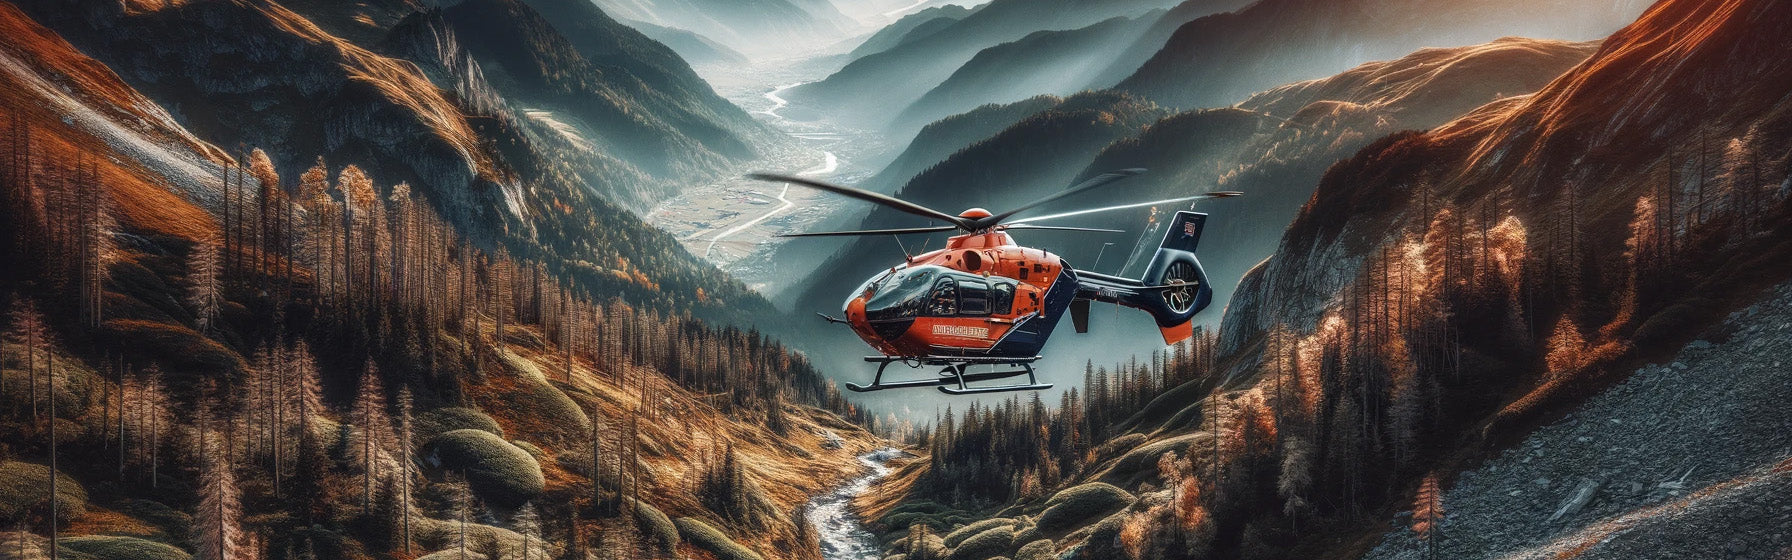 Emergency Chopper Traveling Off Grid in Rescue Operations